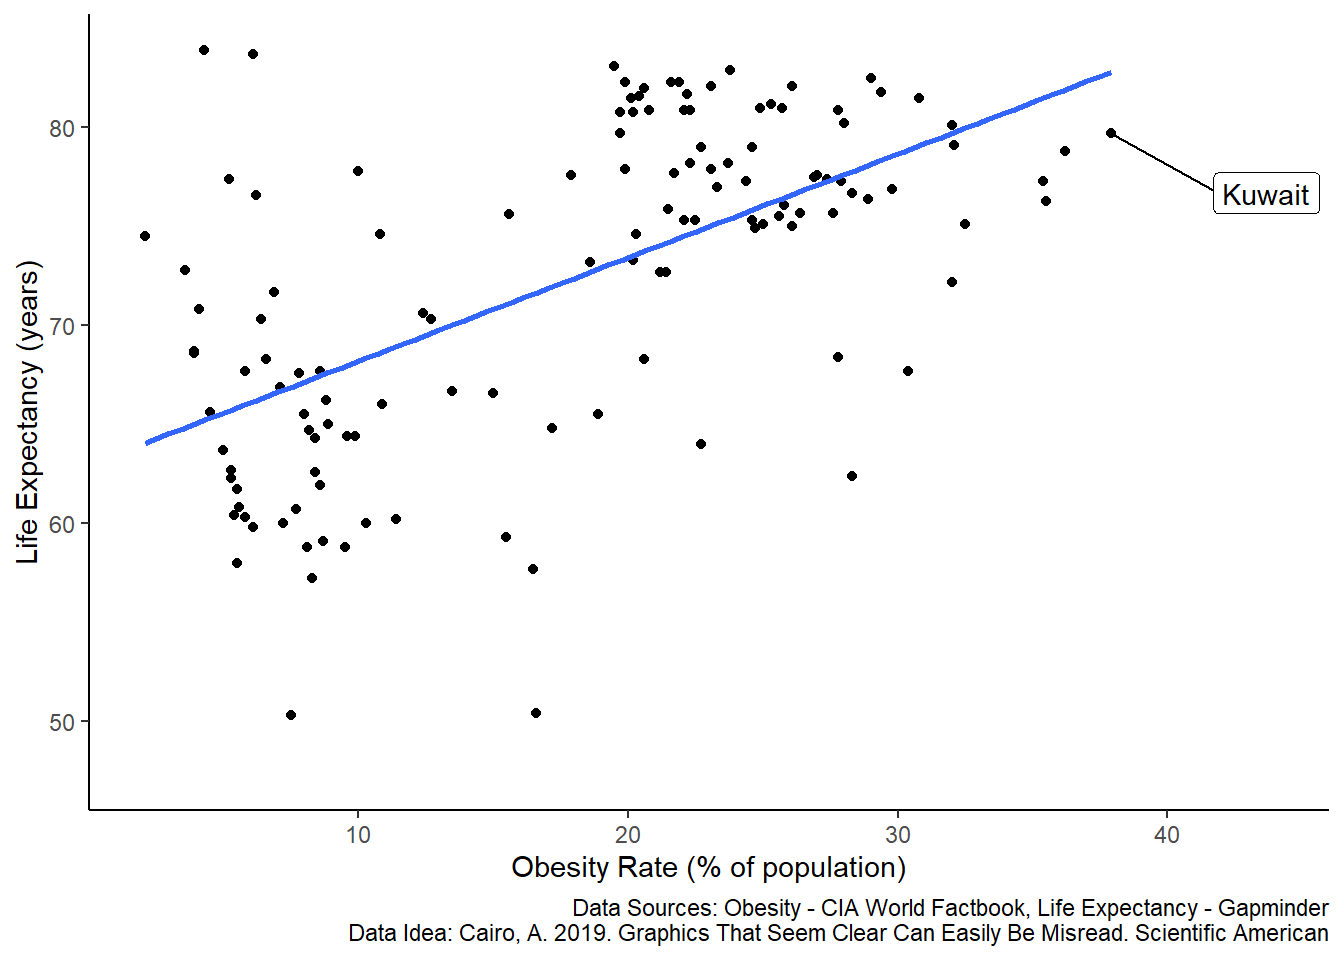 Correlation between life expectancy and the percent of a population that is extremely obese across countries. Each dot represents life expectancy and obesity for a single country in 2016 (n = 128 countries). The regression line is a least-squares linear fit. Data are compiled by www.gapminder.org.